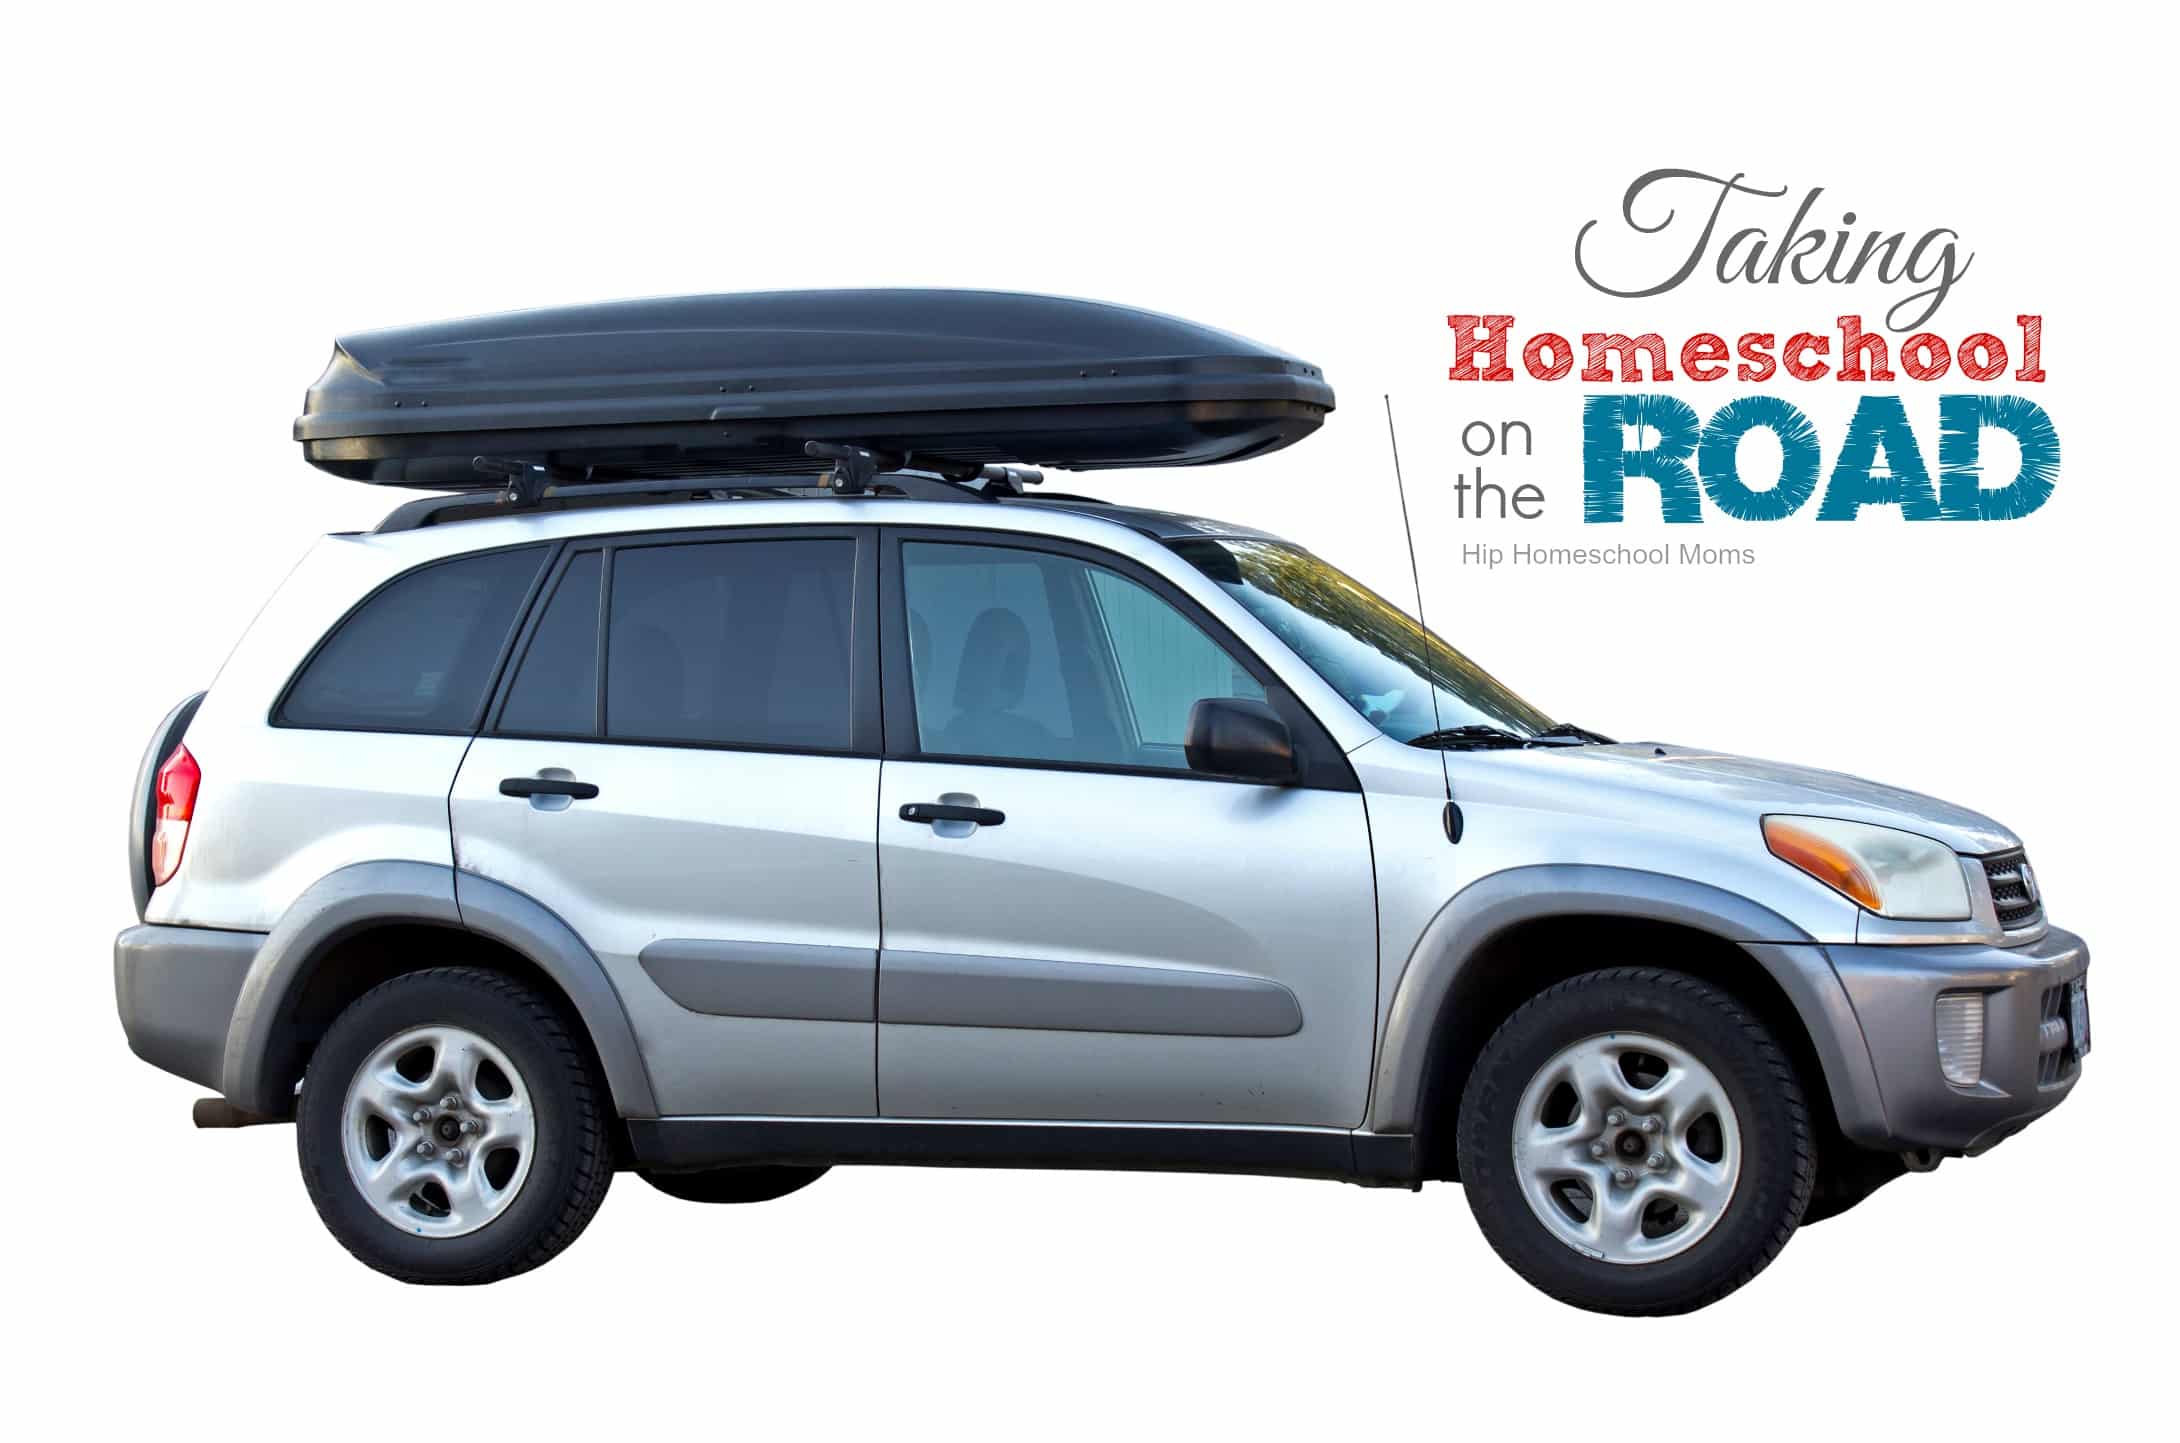 Taking Your Homeschool on the Road